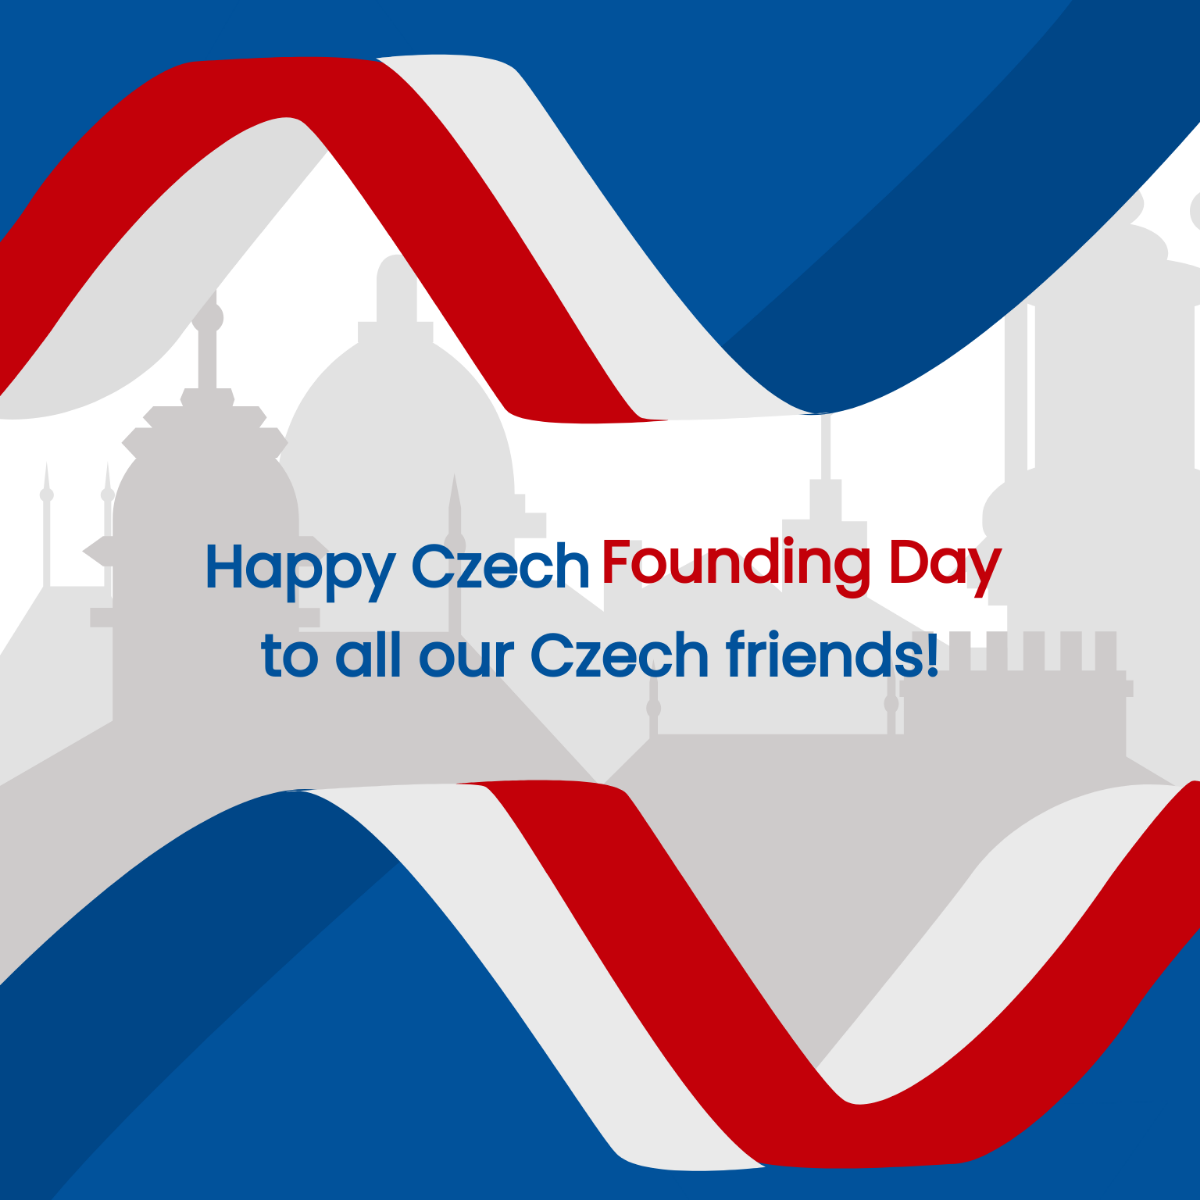 Czech Founding Day Greeting Card Vector Template